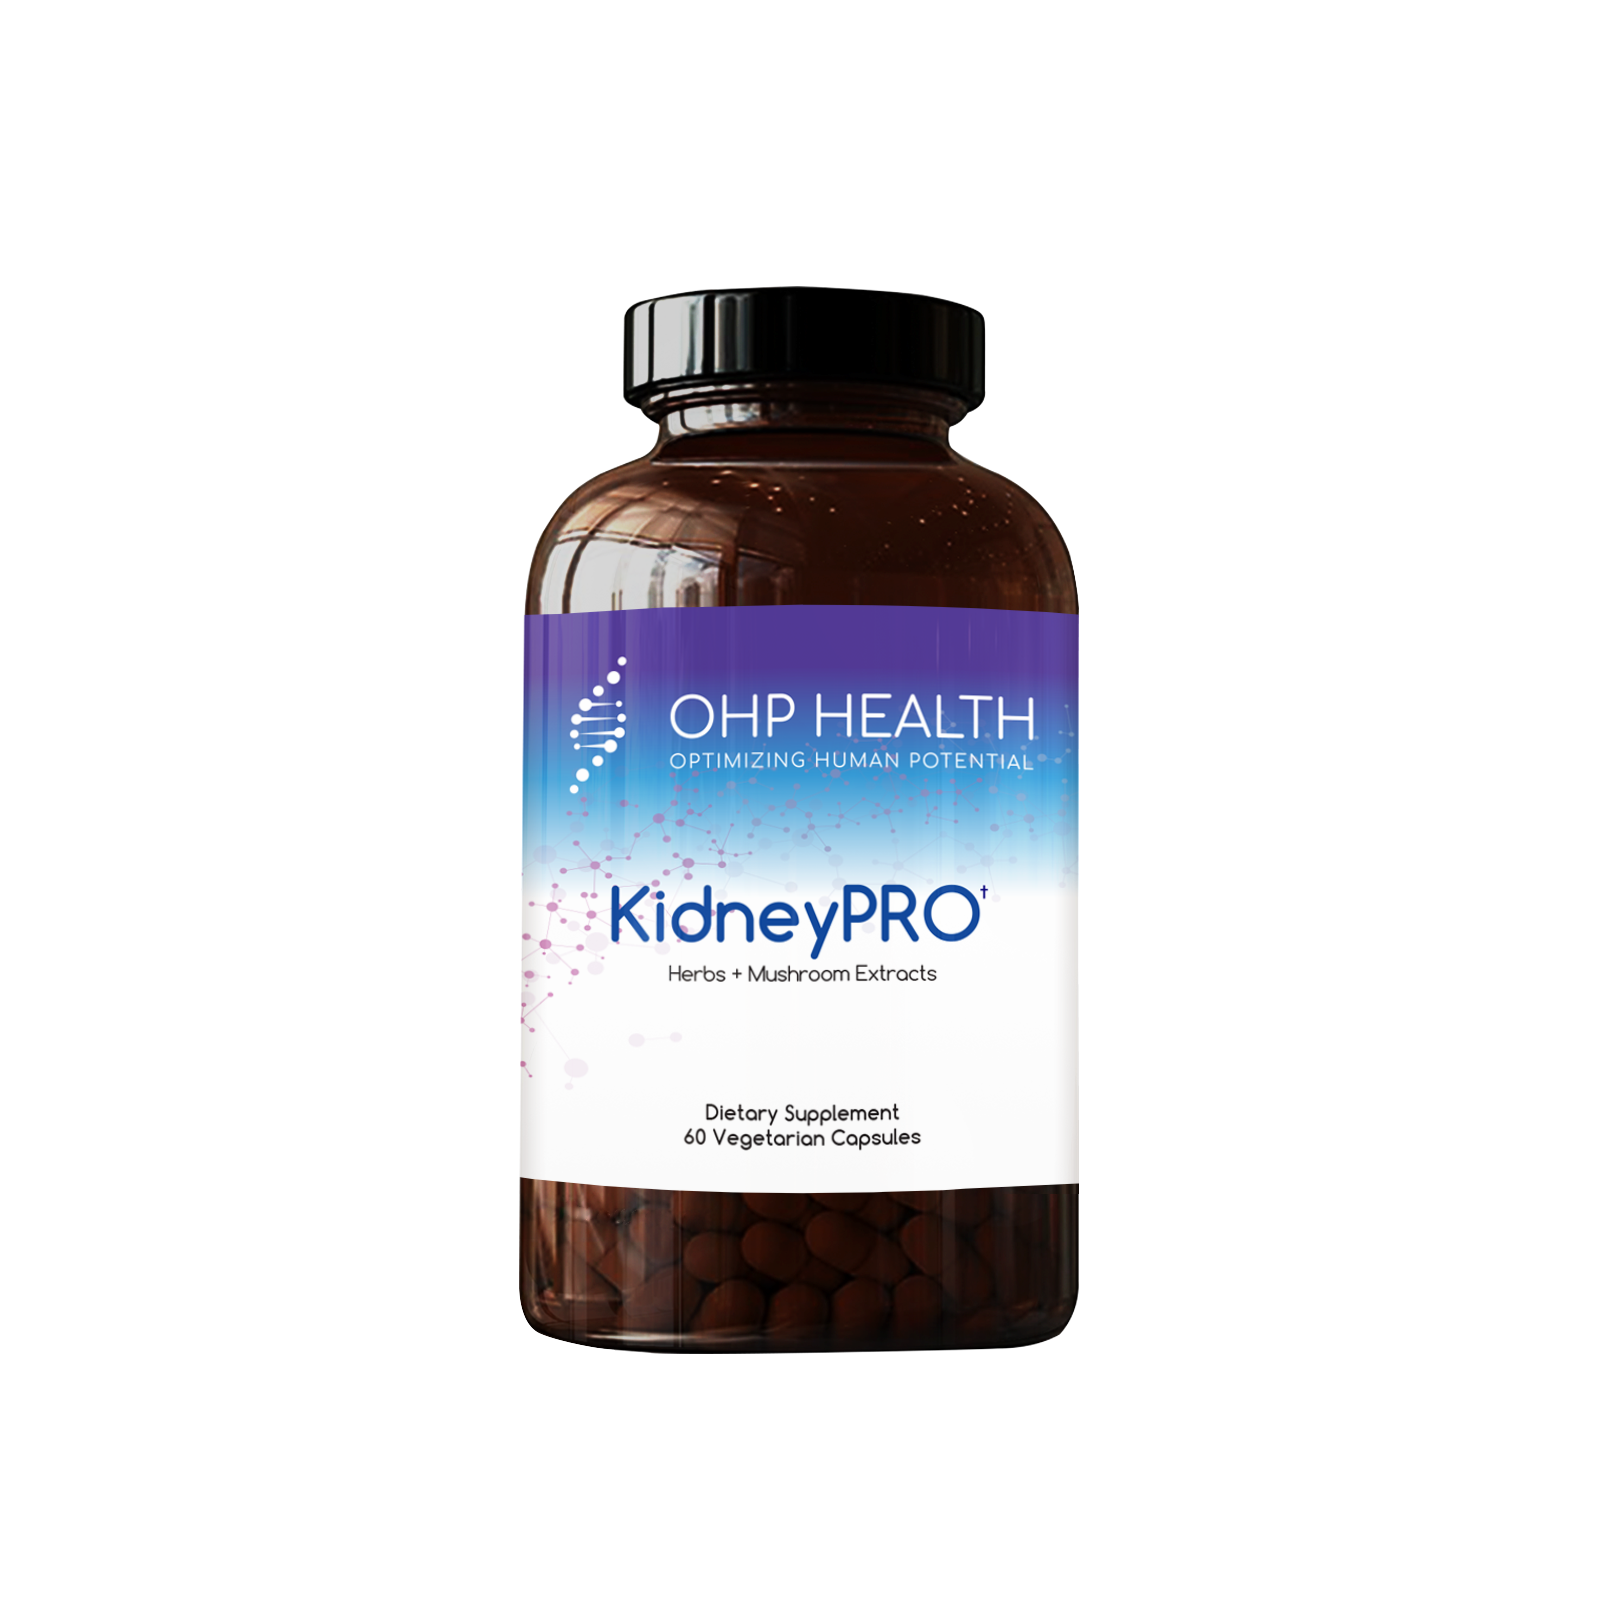 A bottle of KidneyPro supplements by Longevity Labs Inc. on a white background.